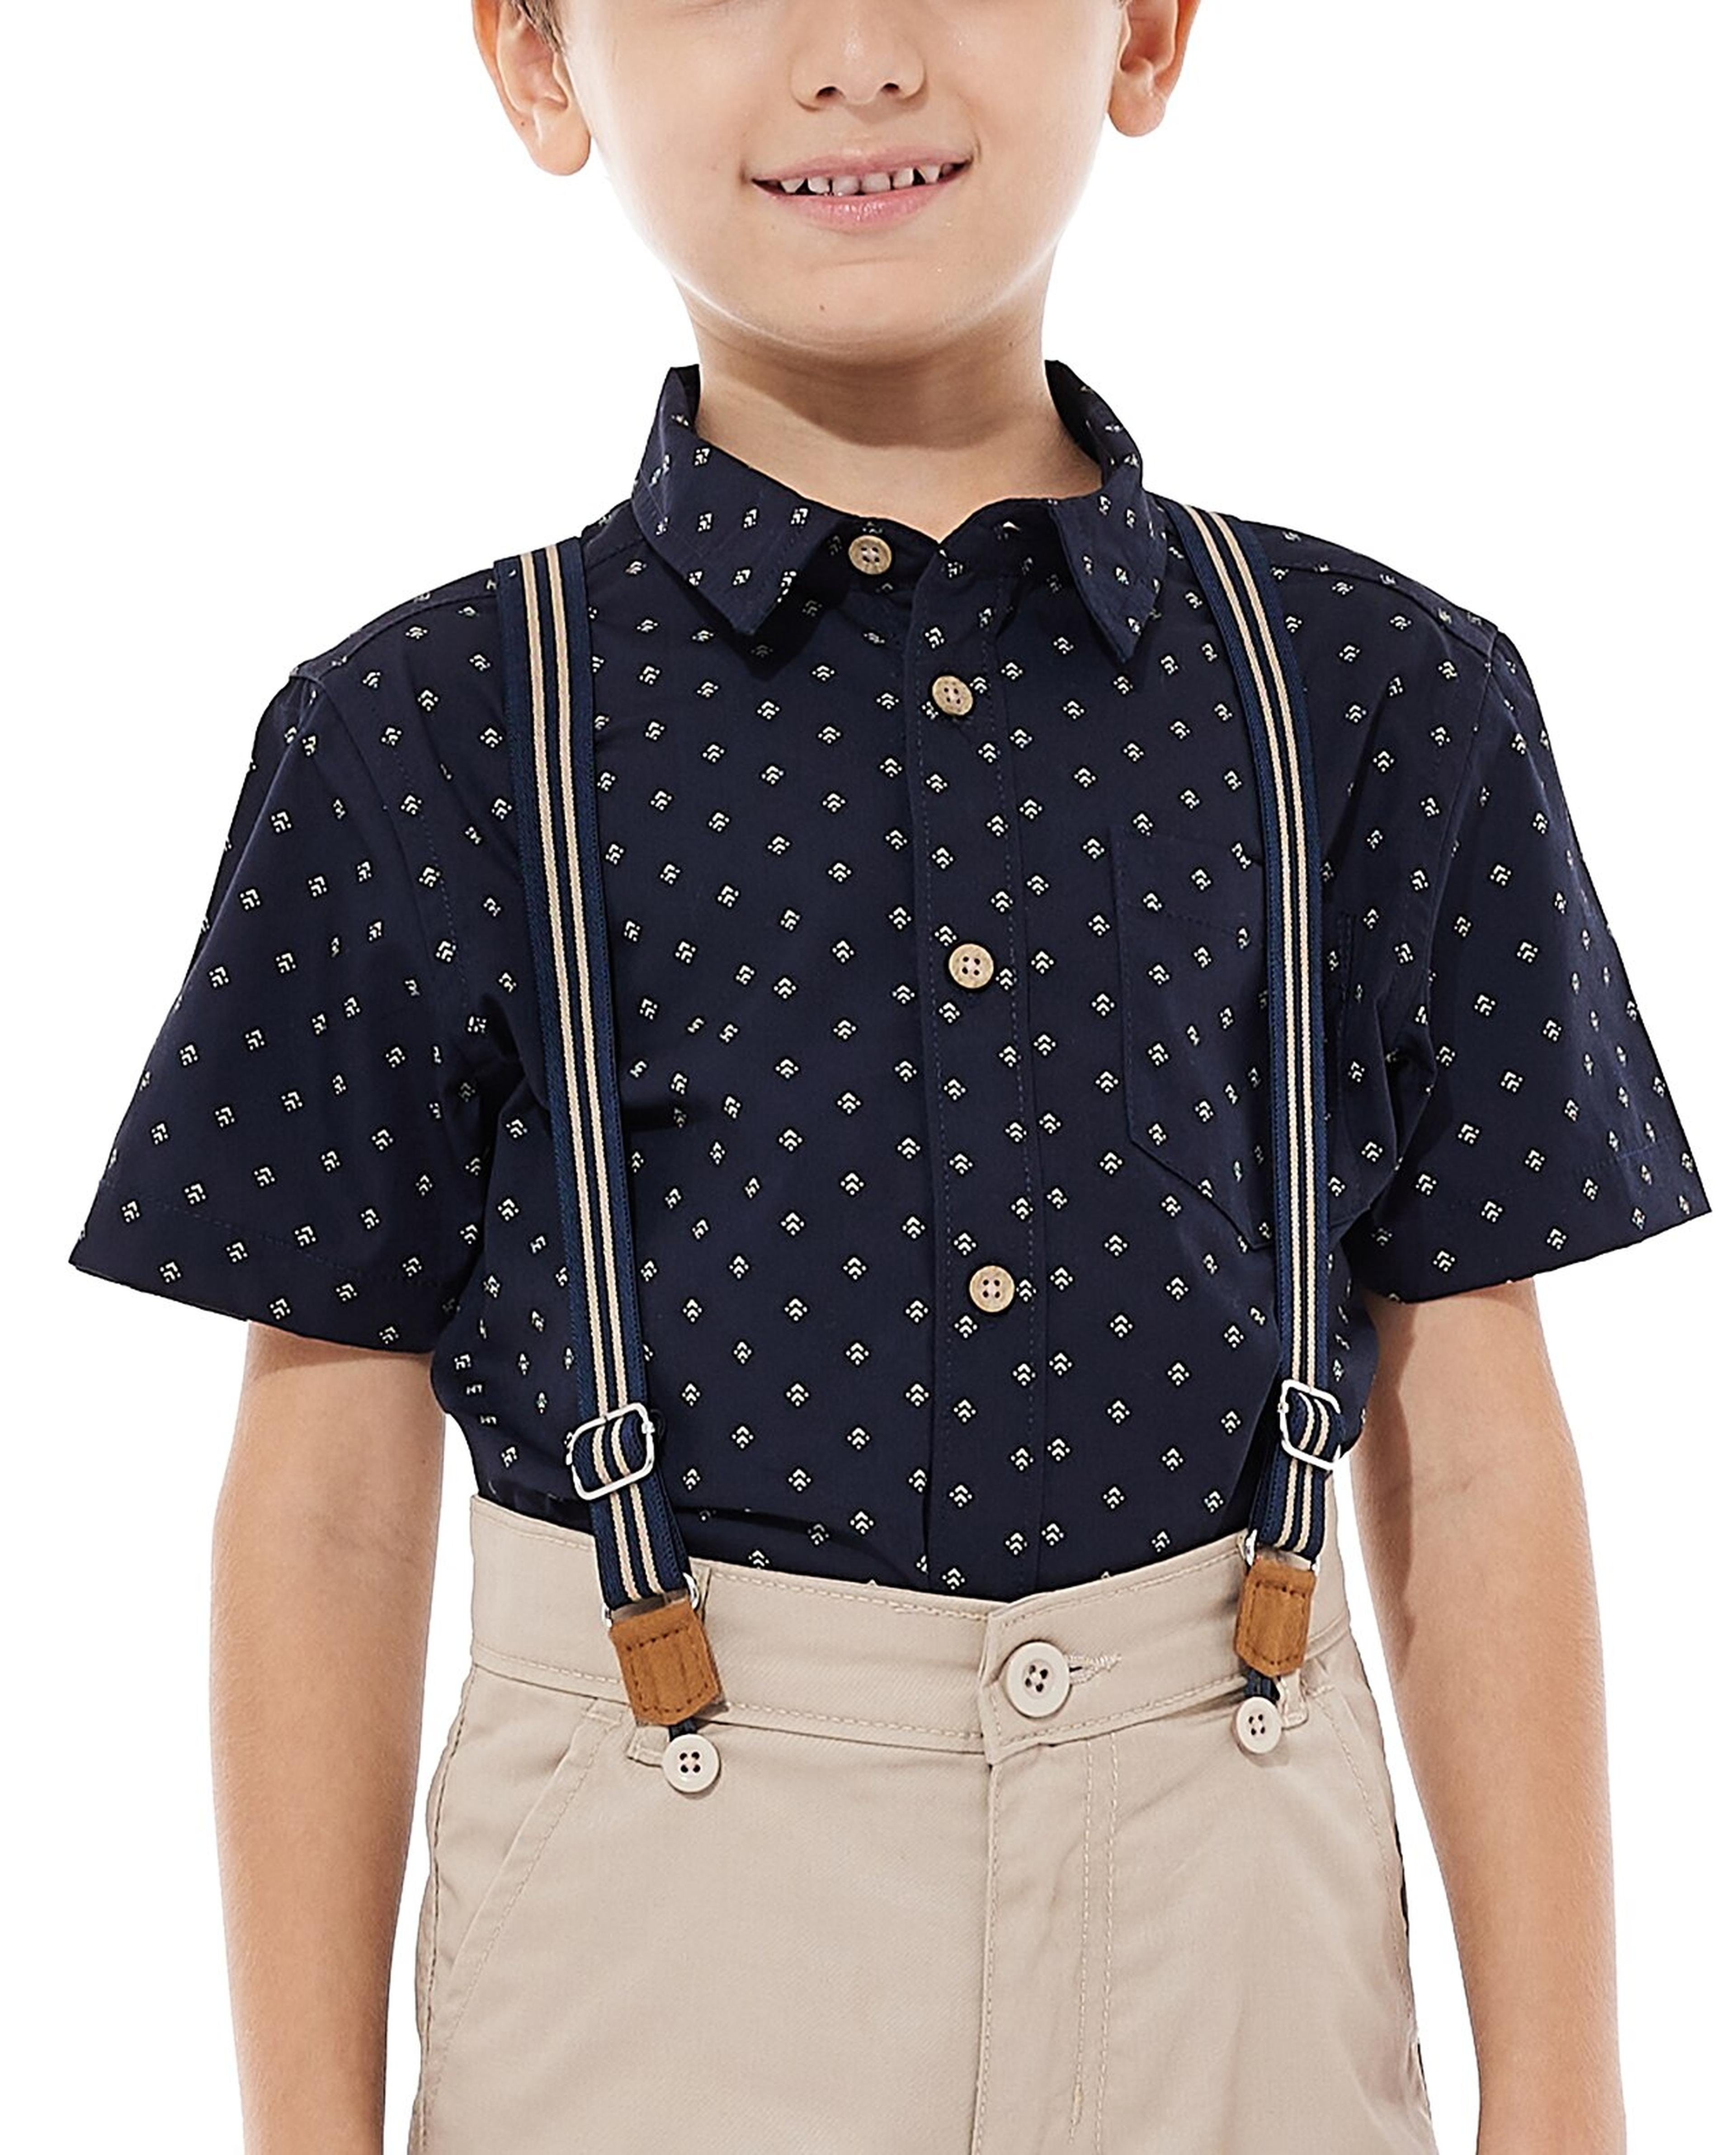 Printed Shirt and Shorts Set with Suspenders